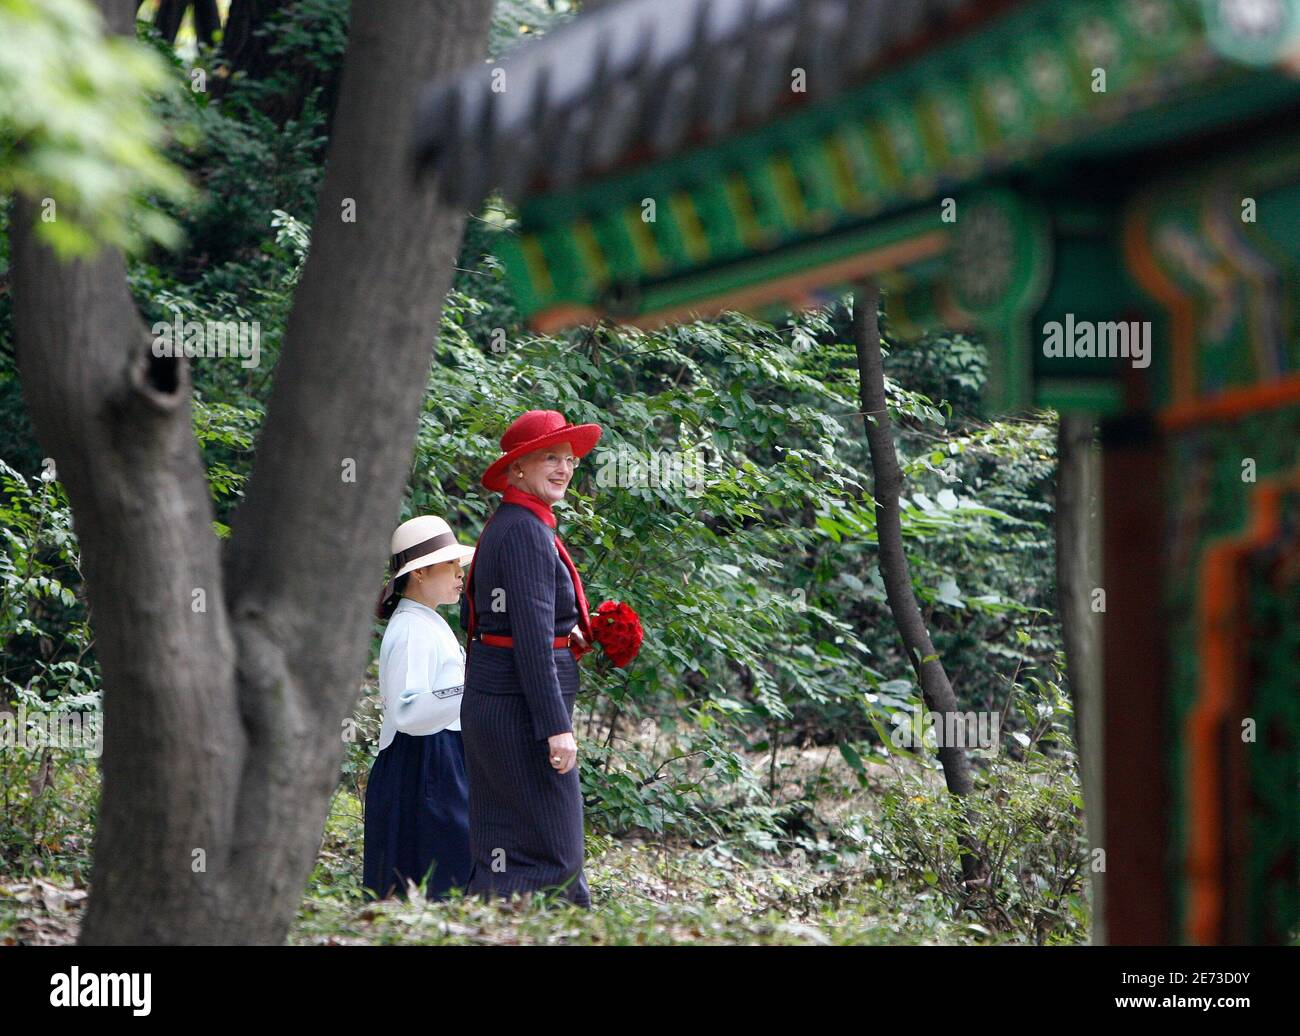 Denmark's Queen Margrethe II (R) visits the Biwon garden in the Changdeokgung palace in Seoul as a guide briefs her October 10, 2007. REUTERS/Lee Jae-Won (SOUTH KOREA) Stock Photo